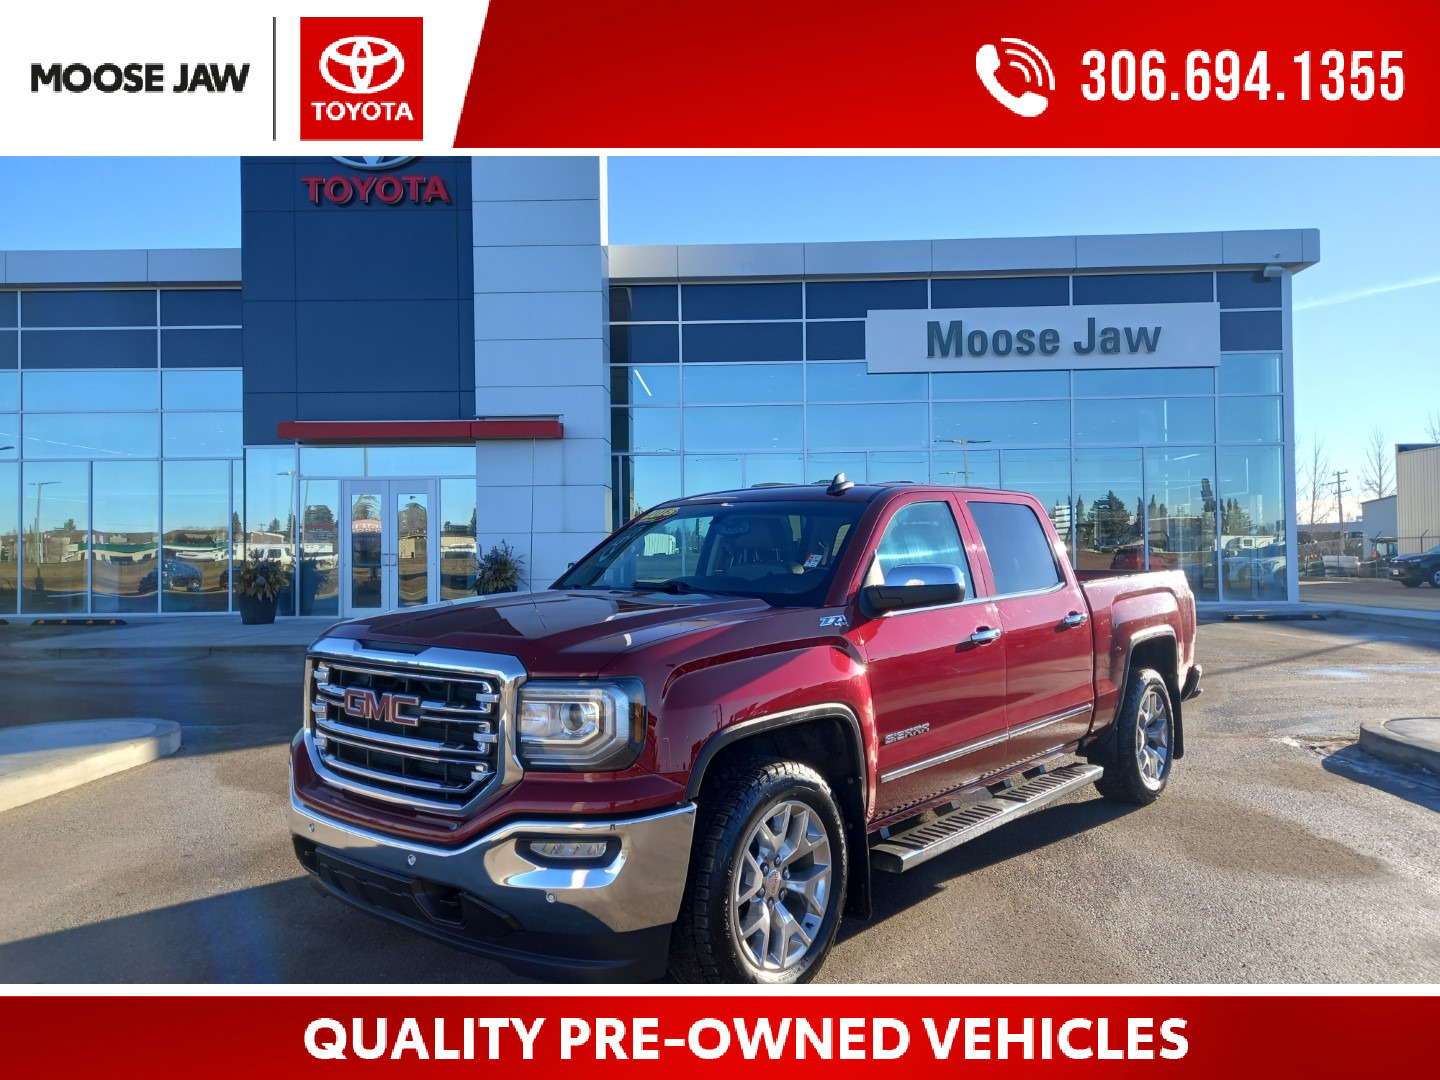 2018 GMC Sierra 1500 SLT LOCAL TRADE IN WITH LOW MILEAGE WELL EQUIPPED 